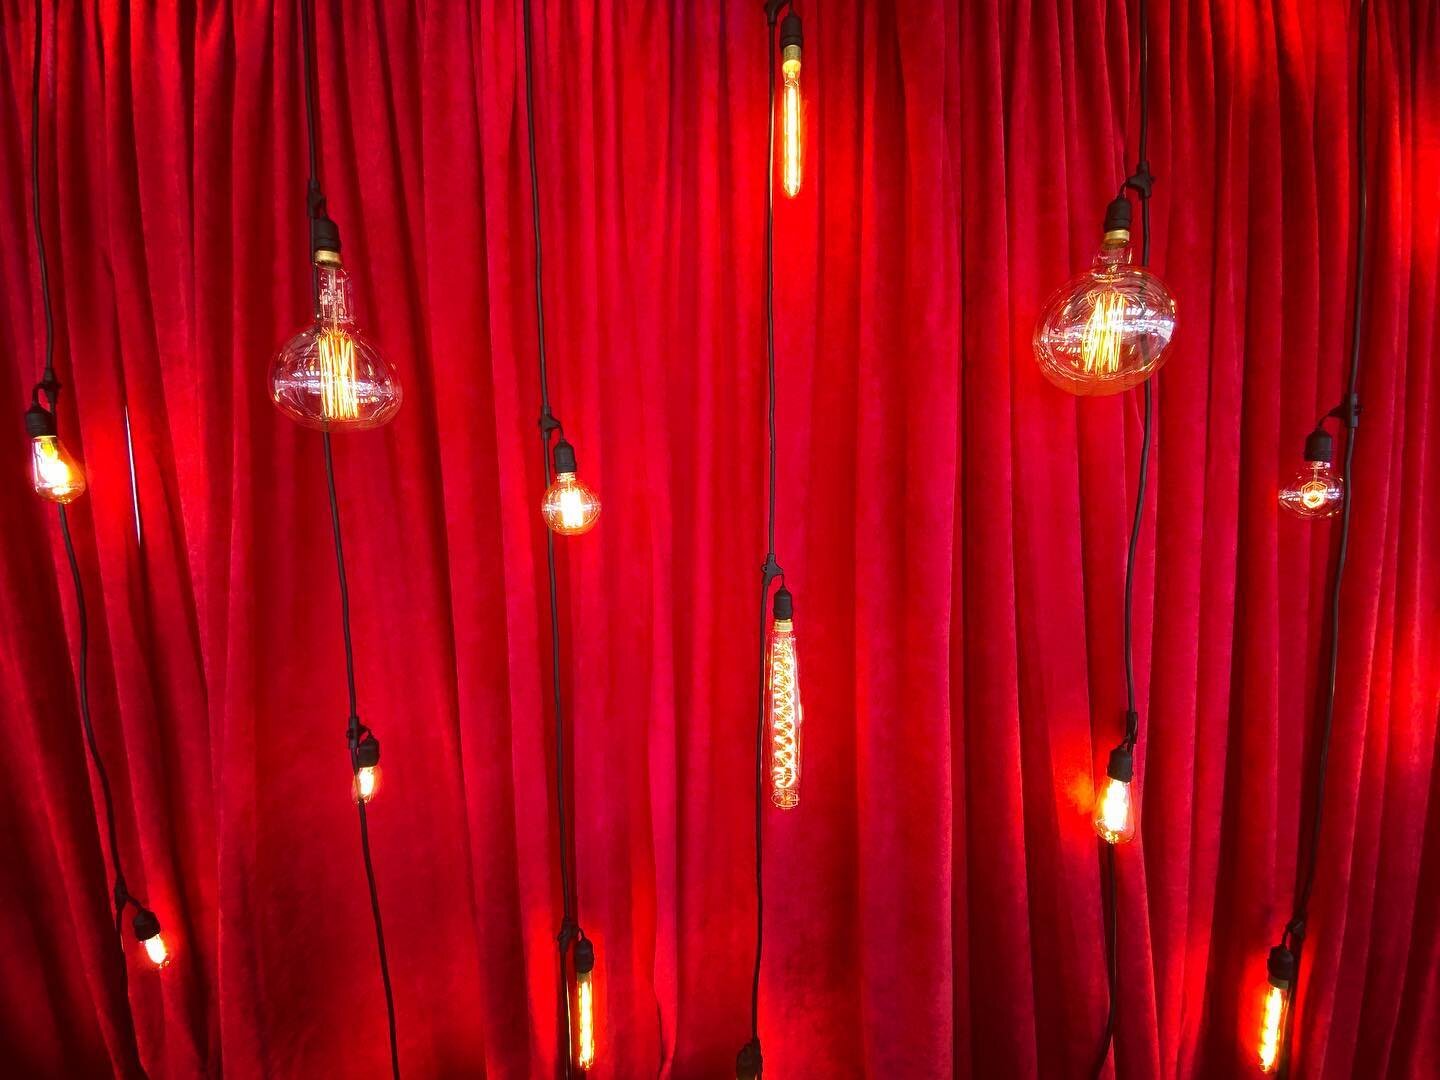 It&rsquo;s showtime!
.
.
.
.
#instagood #insta #pnw #bowerbirdpdx #bowerbirdevents #lit #red #draping #showtime #edison #bulbs #edisonbulbs #backdrop #inspiration